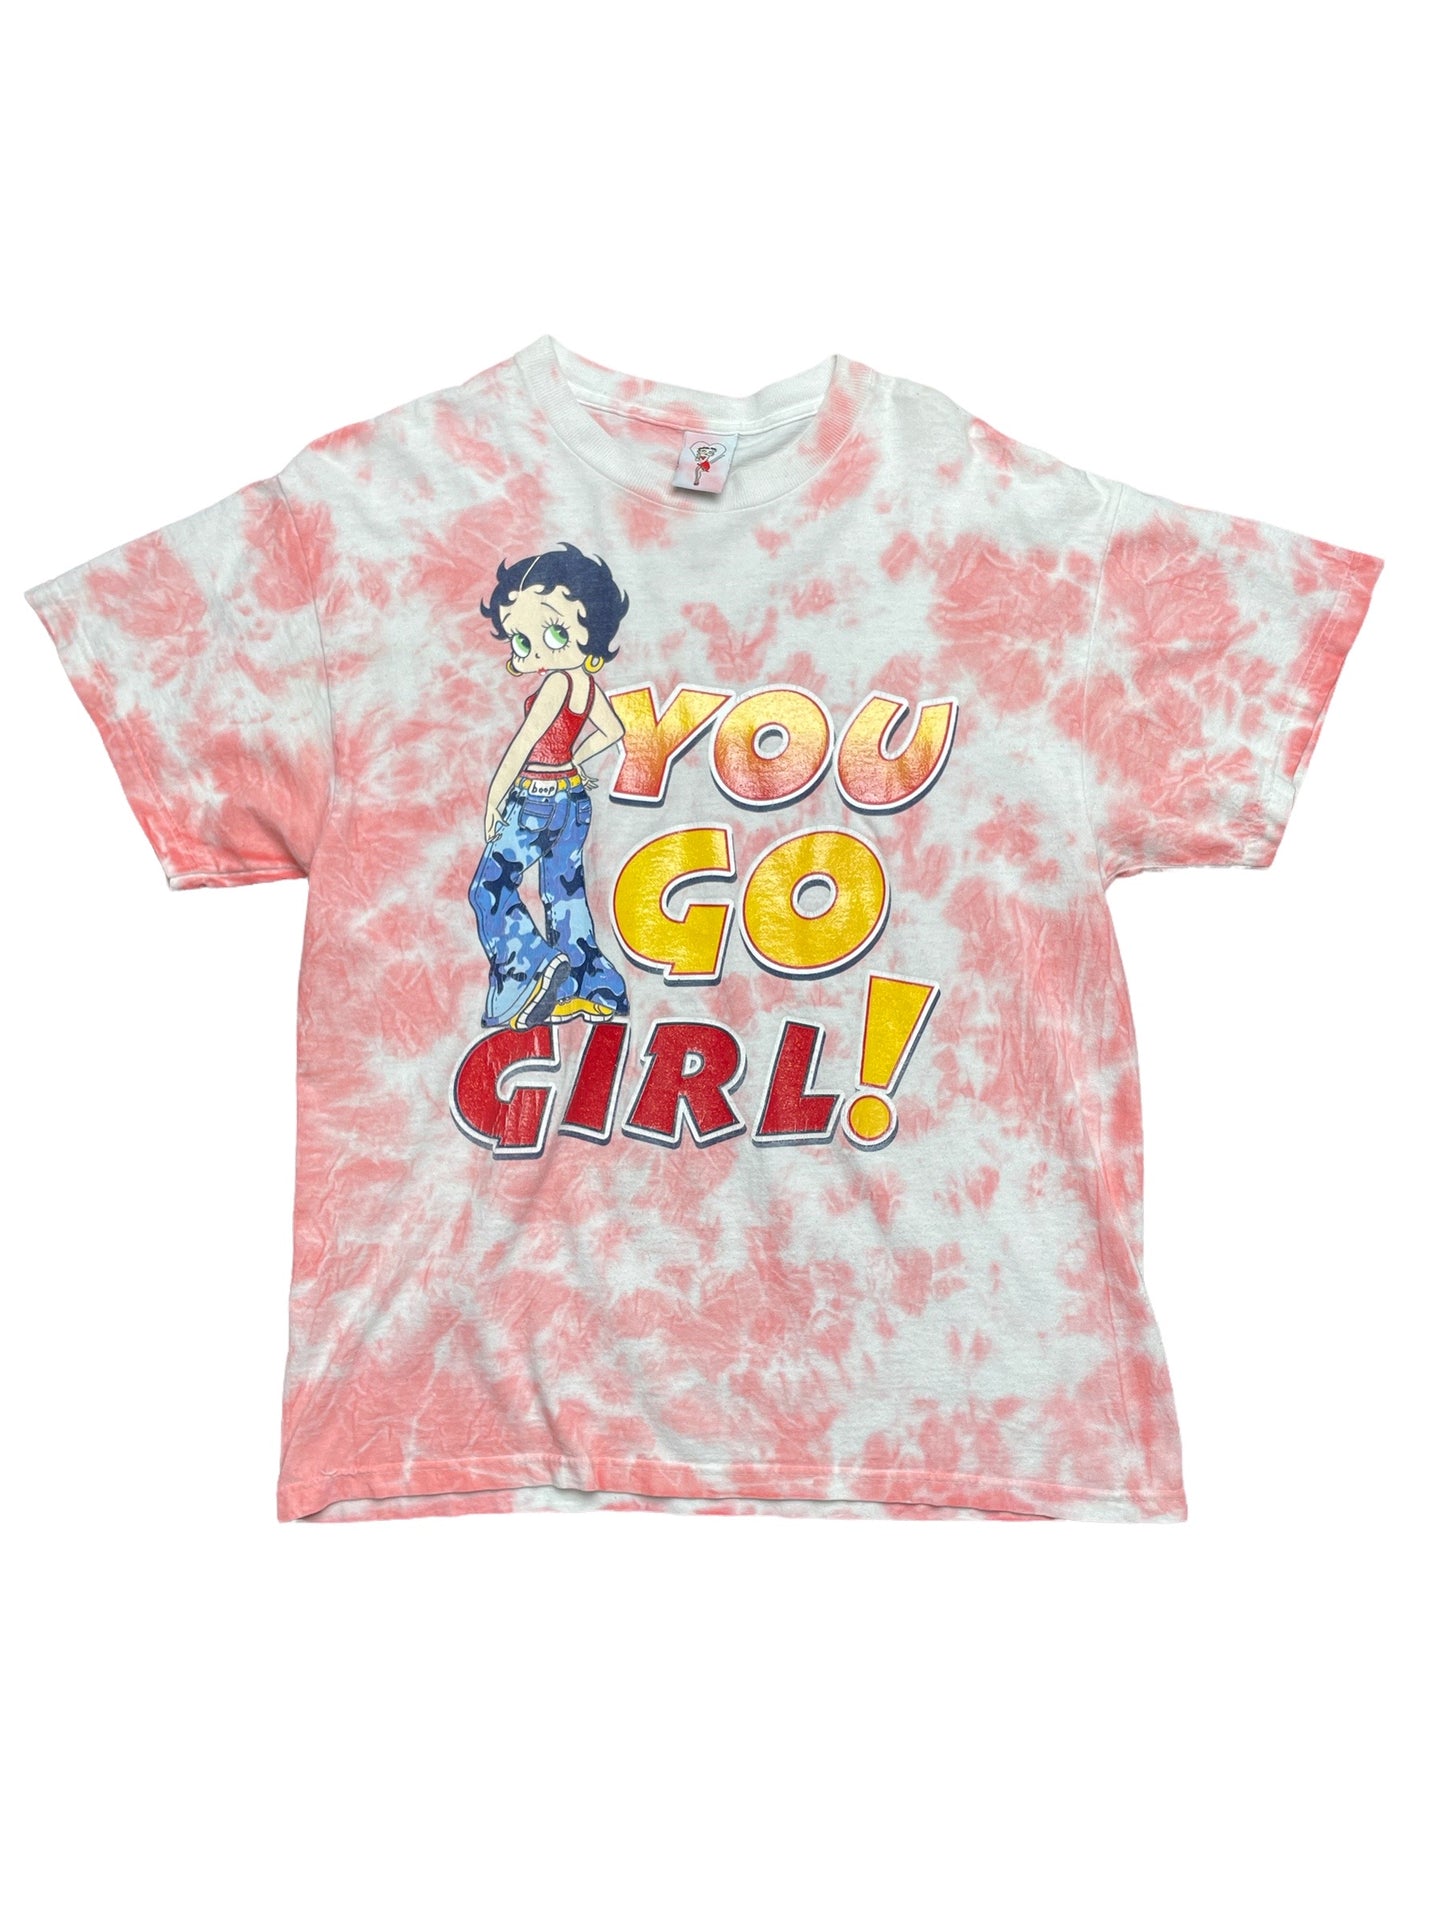 Vintage 2000 You Go Girl! Betty Boop Tie Dye T Shirt Large